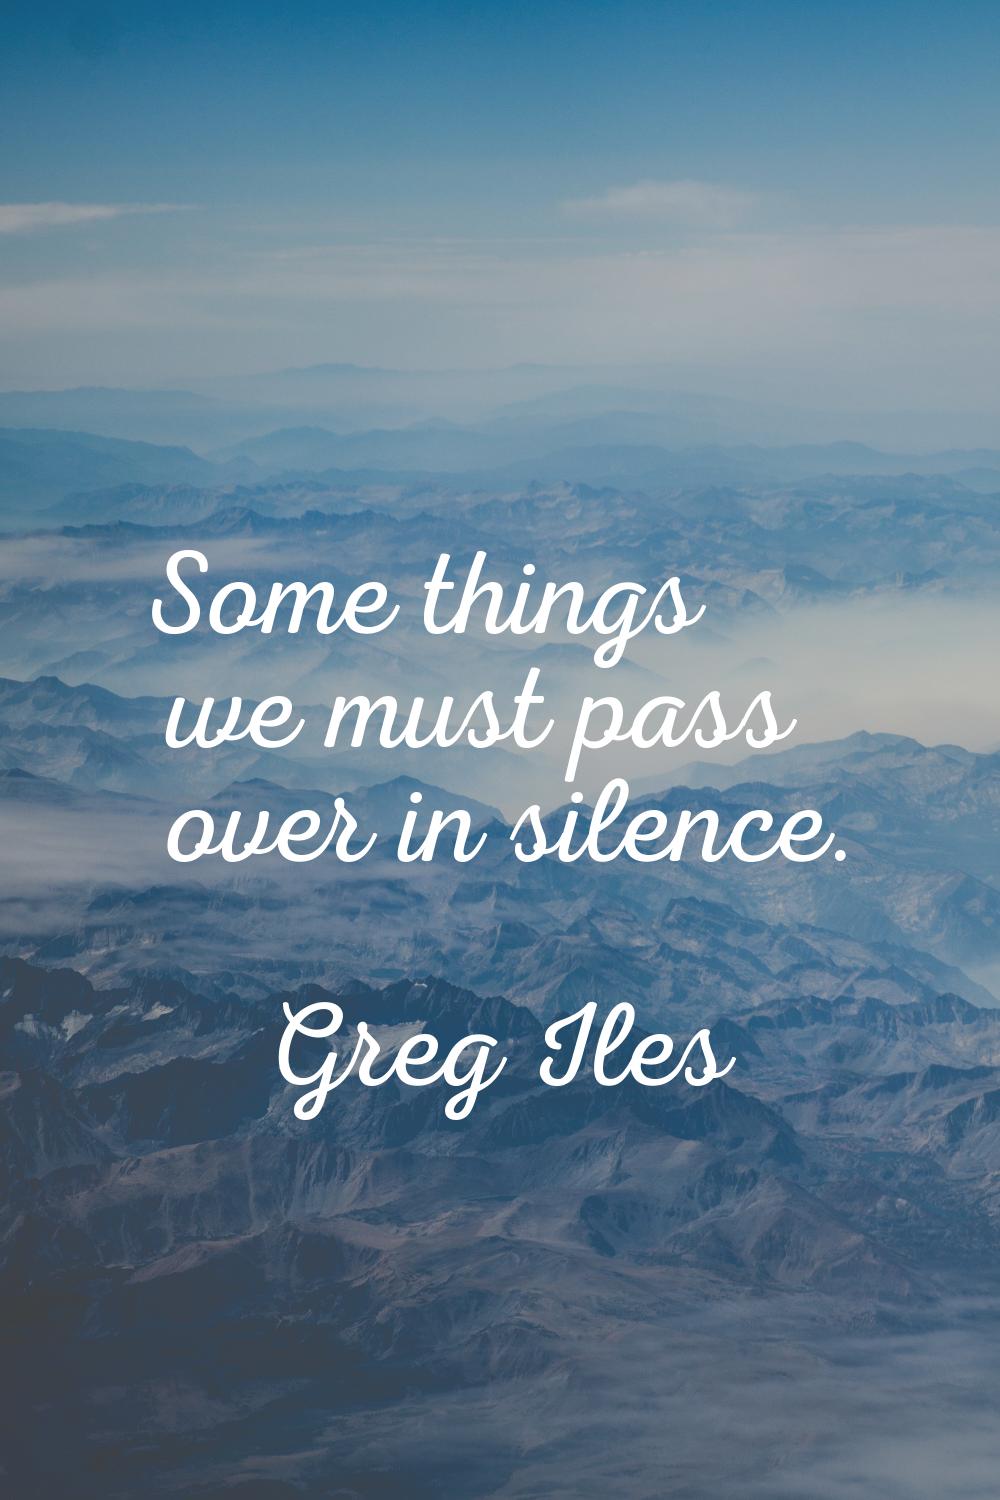 Some things we must pass over in silence.